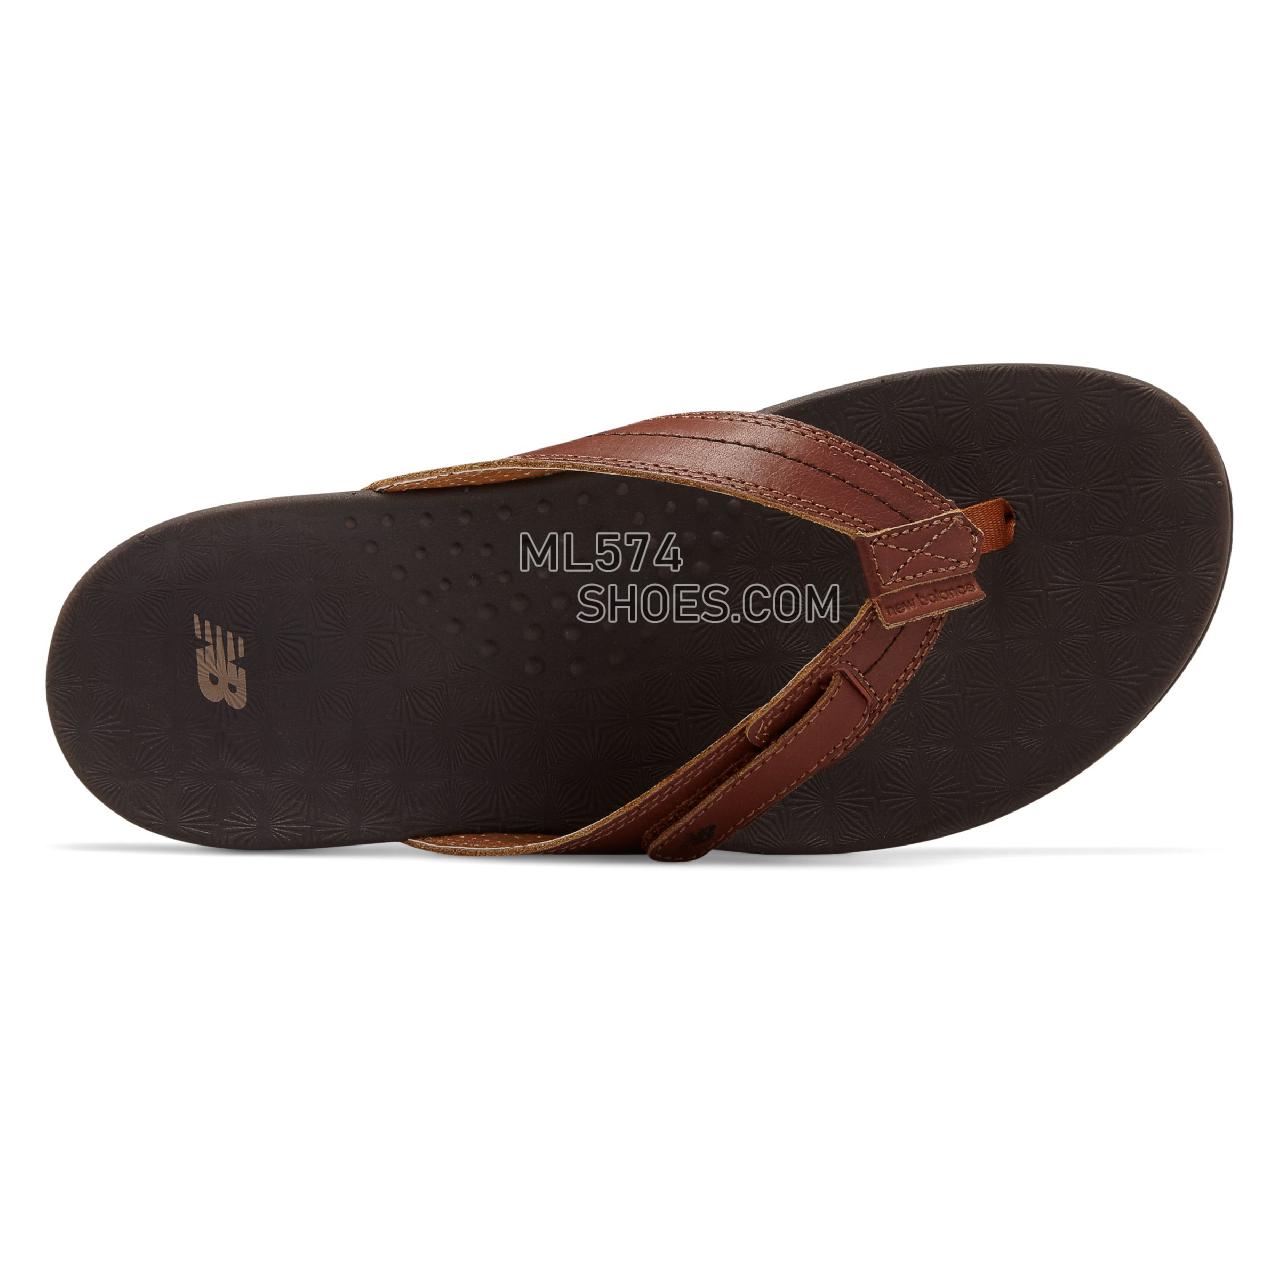 New Balance Voyager Thong - Women's 6102 - Sandals Brown - WR6102WSK